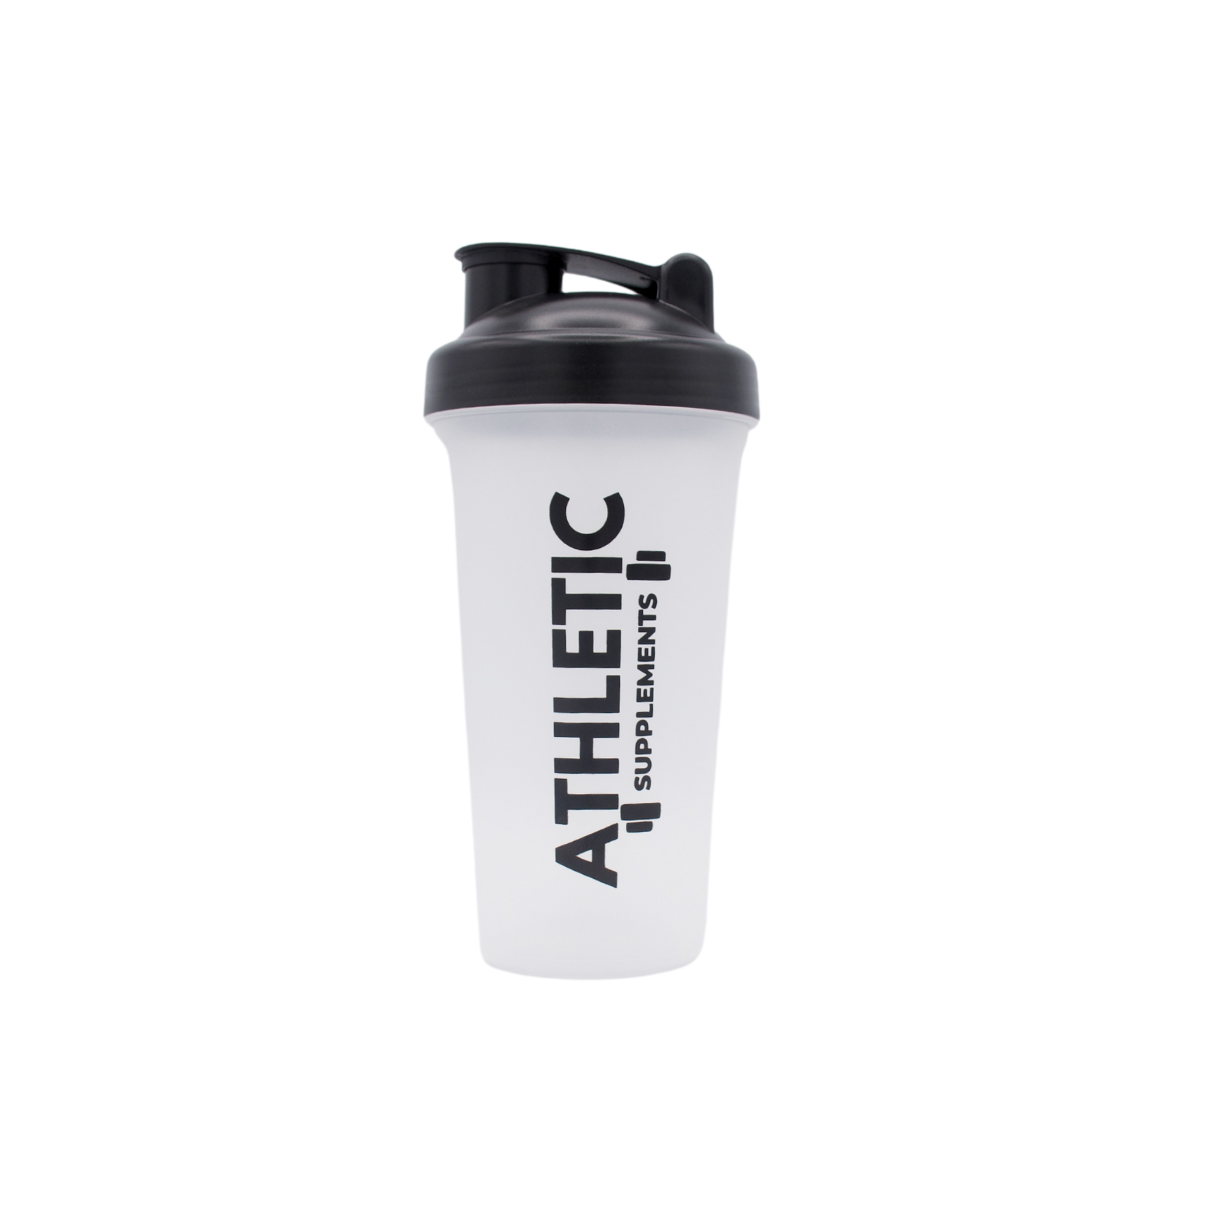 Pro Shaker Athletic Supplements